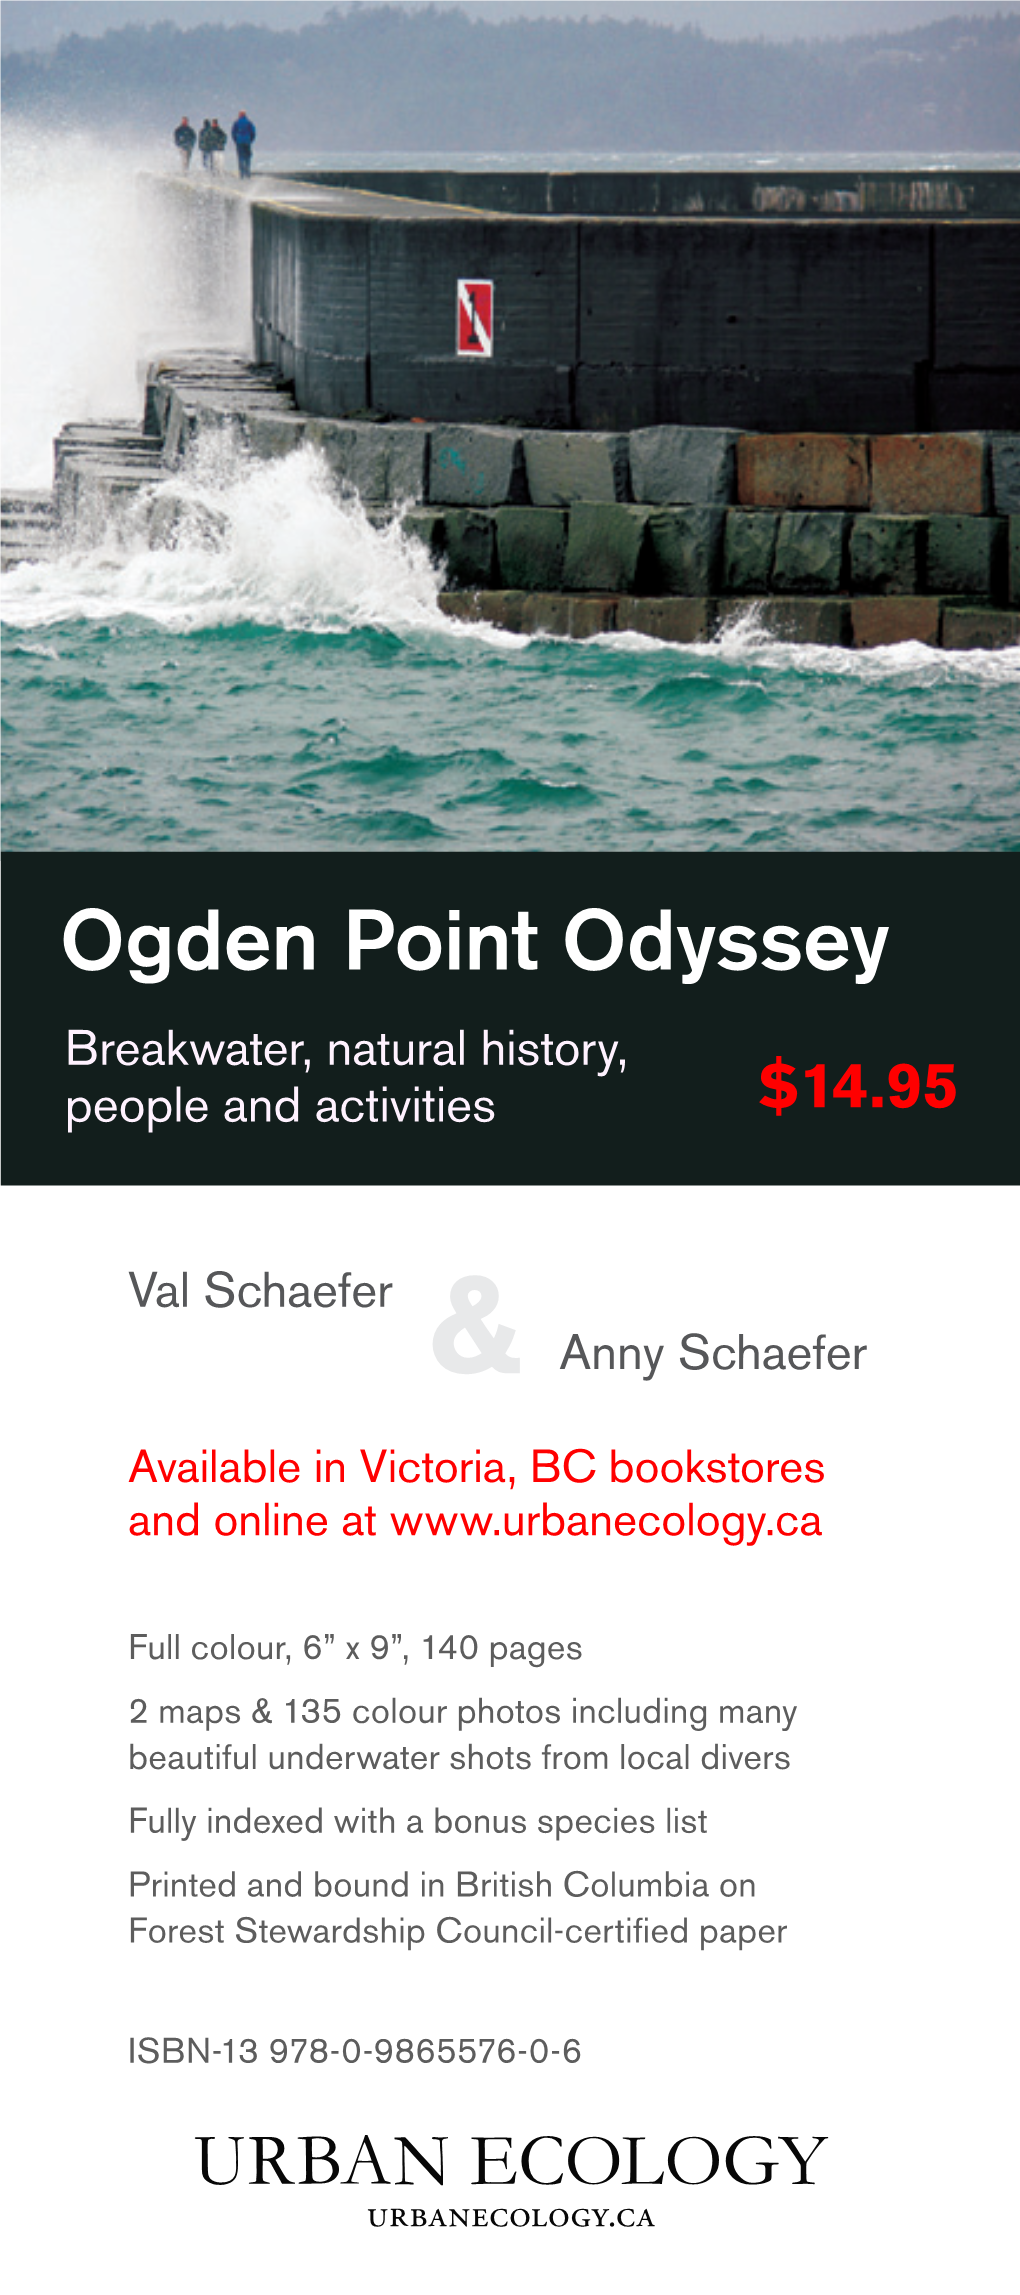 Ogden Point Odyssey Breakwater, Natural History, People and Activities $14.95